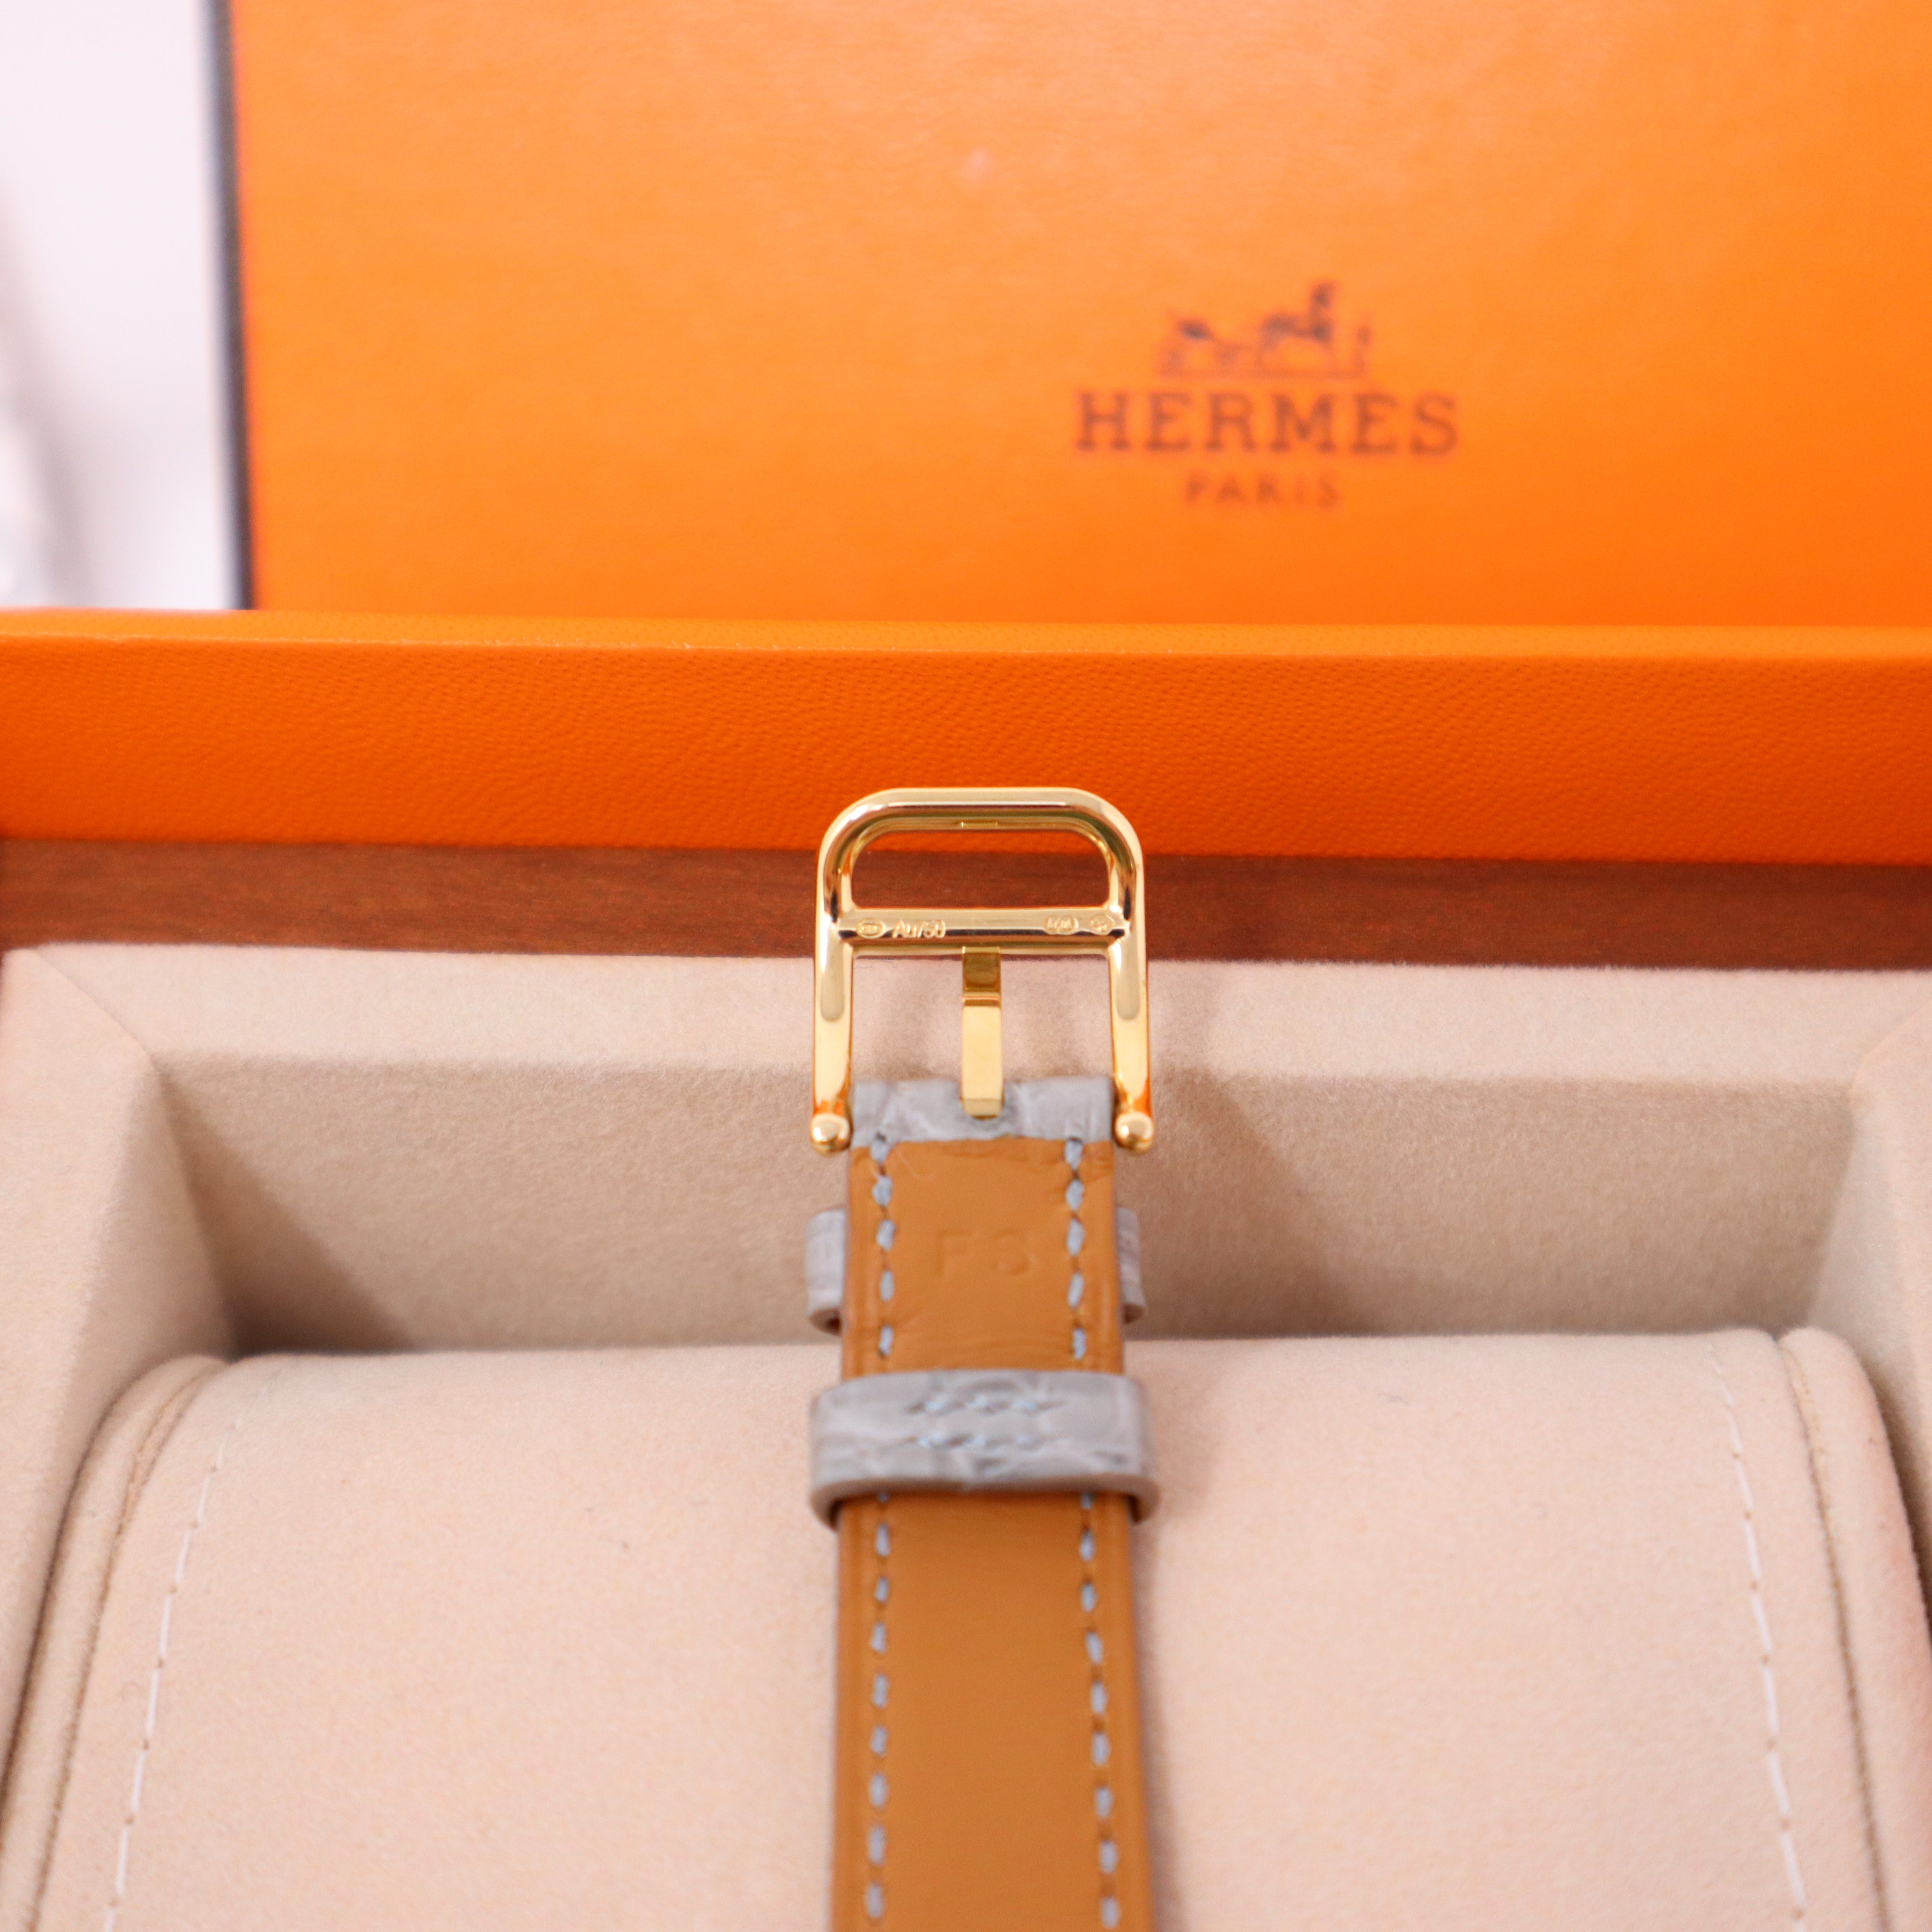 Hermès Timepieces Cape Cod 31mm Small 18-karat Gold Alligator Mother-of-Pearl and Diamond Watch - Women - Gold Fine Watches - One Size